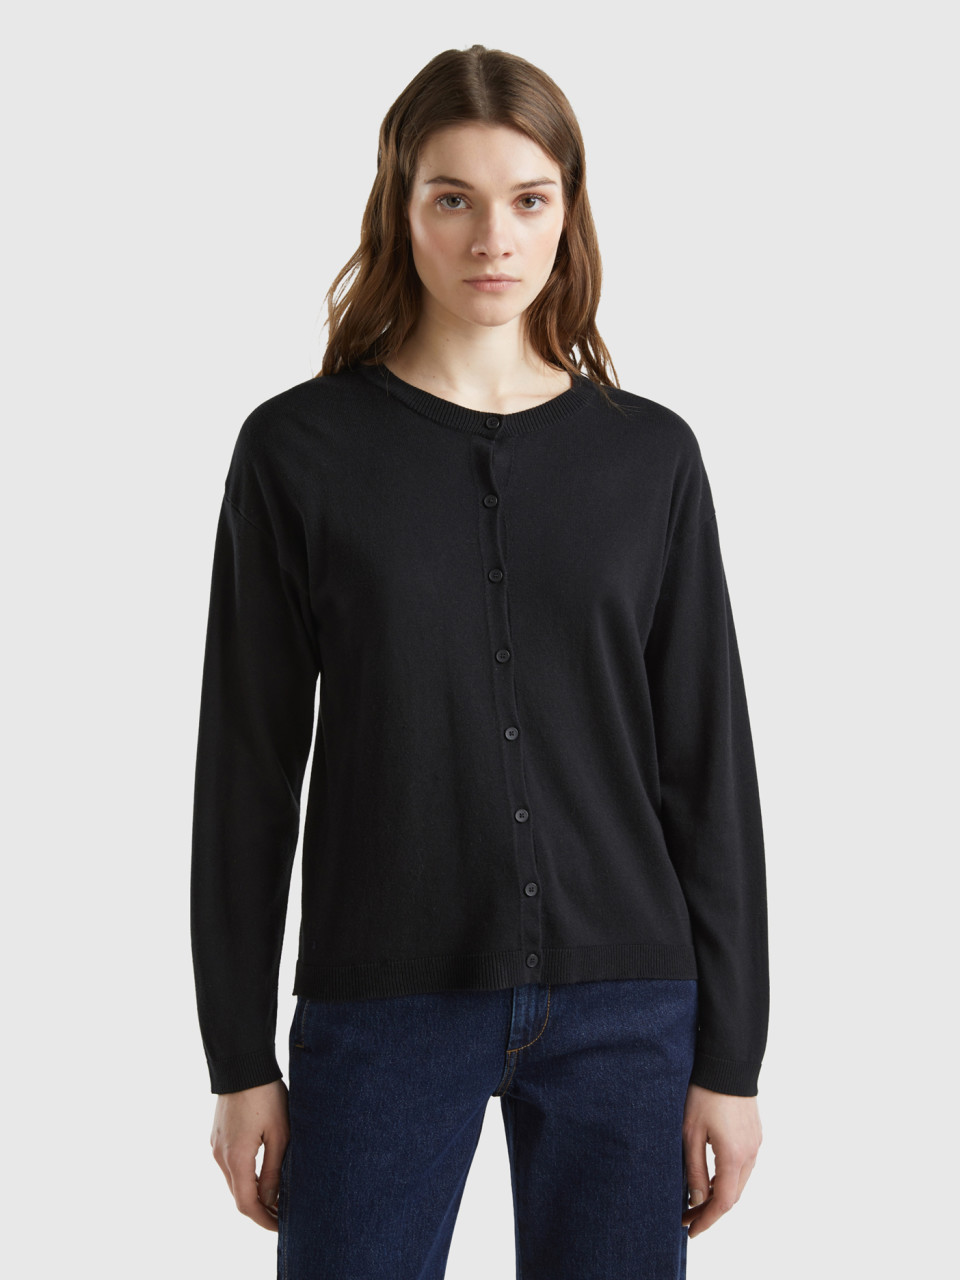 Benetton, Crew Neck Cardigan With Buttons, Black, Women